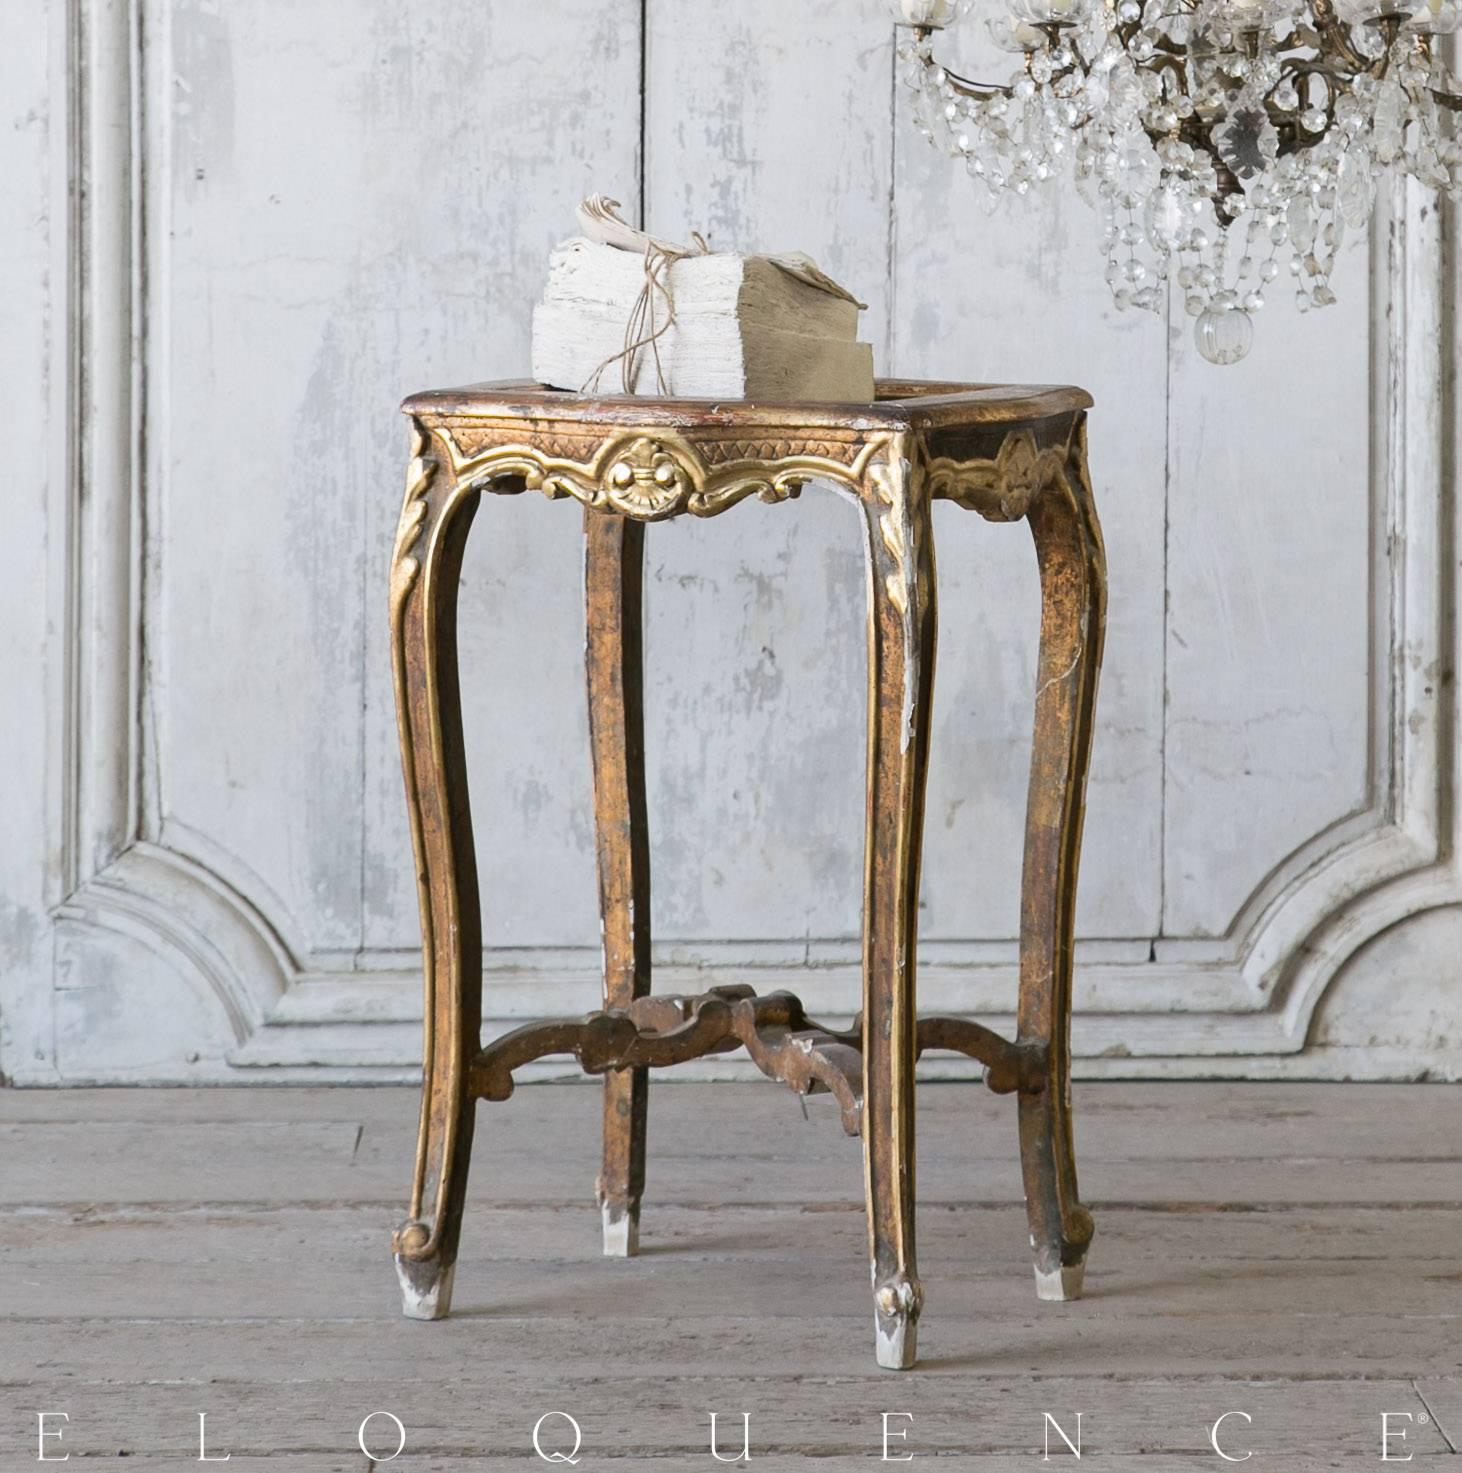 Single lovely Louis XV style vintage side table finished in a darkly patina, gilt and distressed to reveal the original brick red undercoat. Hand-carved fleur de lis and floral outlines add elegance and charm. This piece is topped with a perfectly